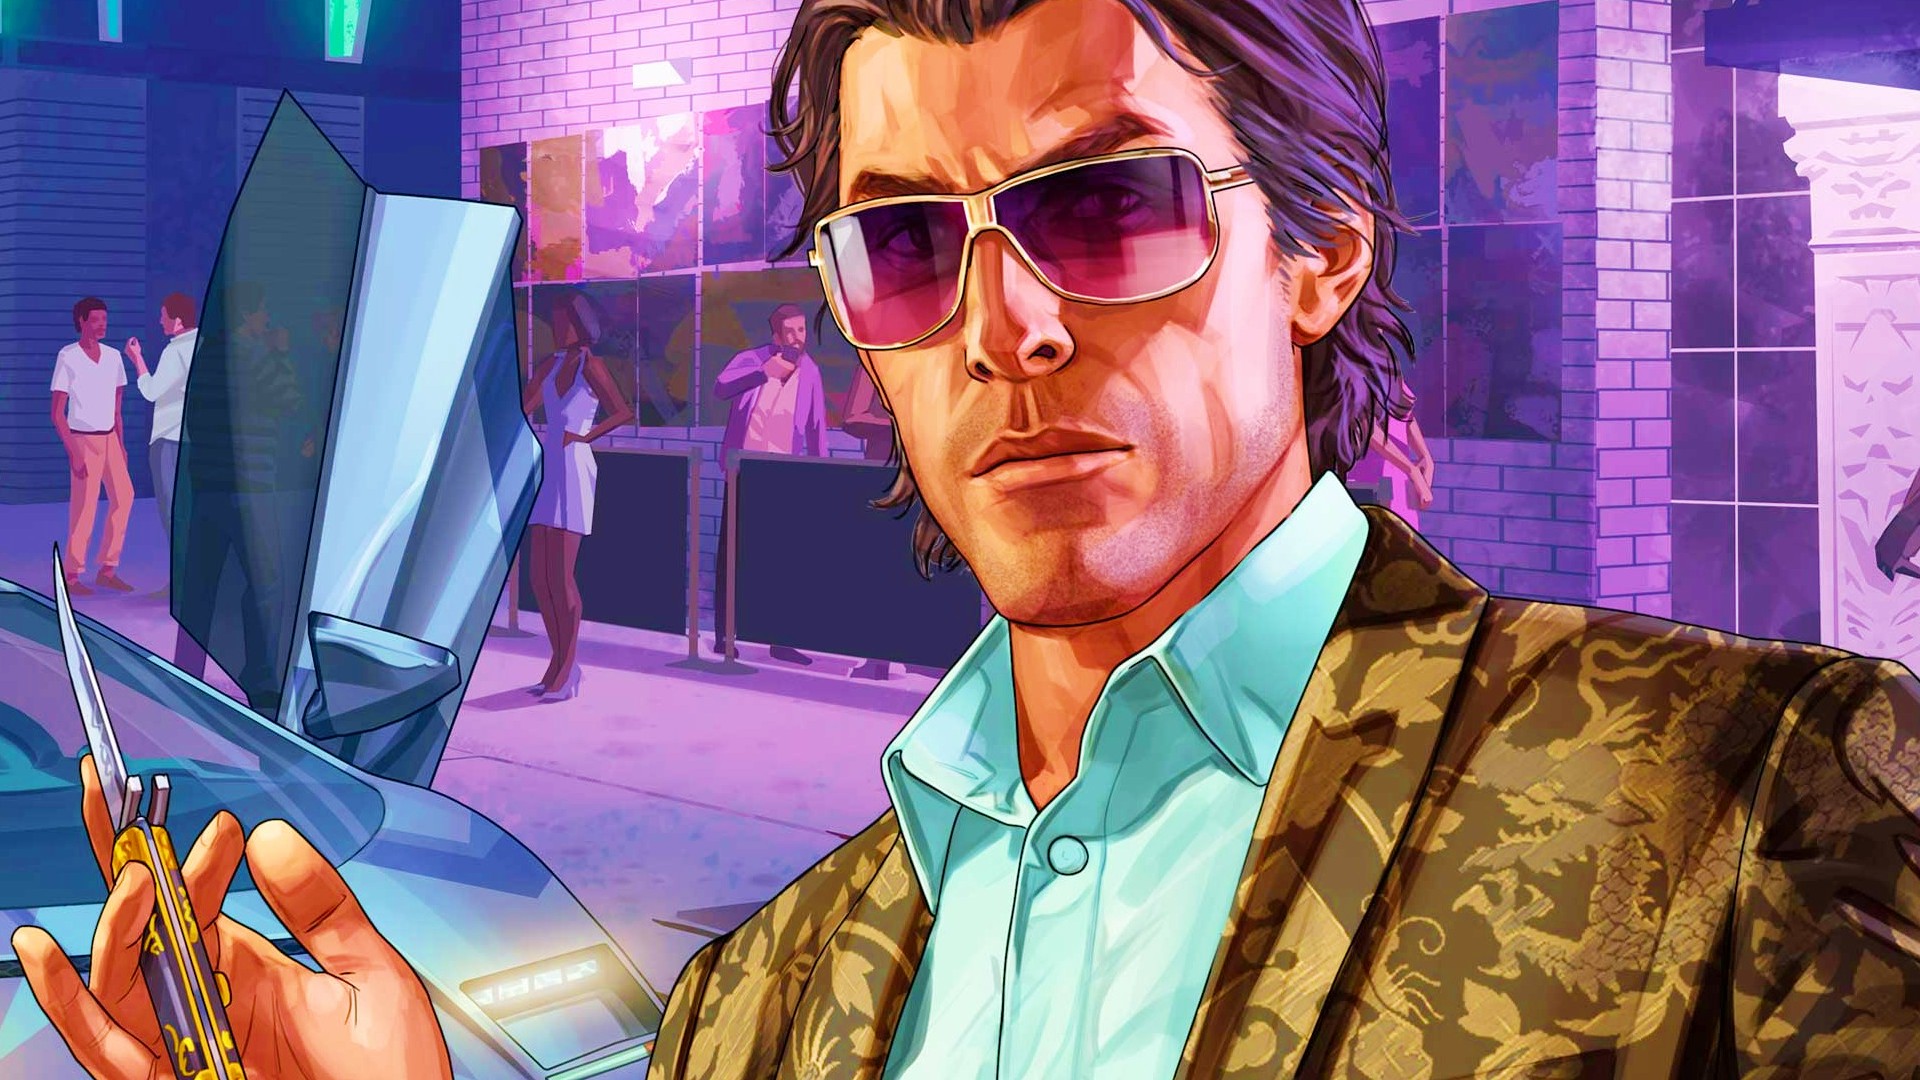 GTA 6 fan says they saw Rockstar game’s full story after taking peyote